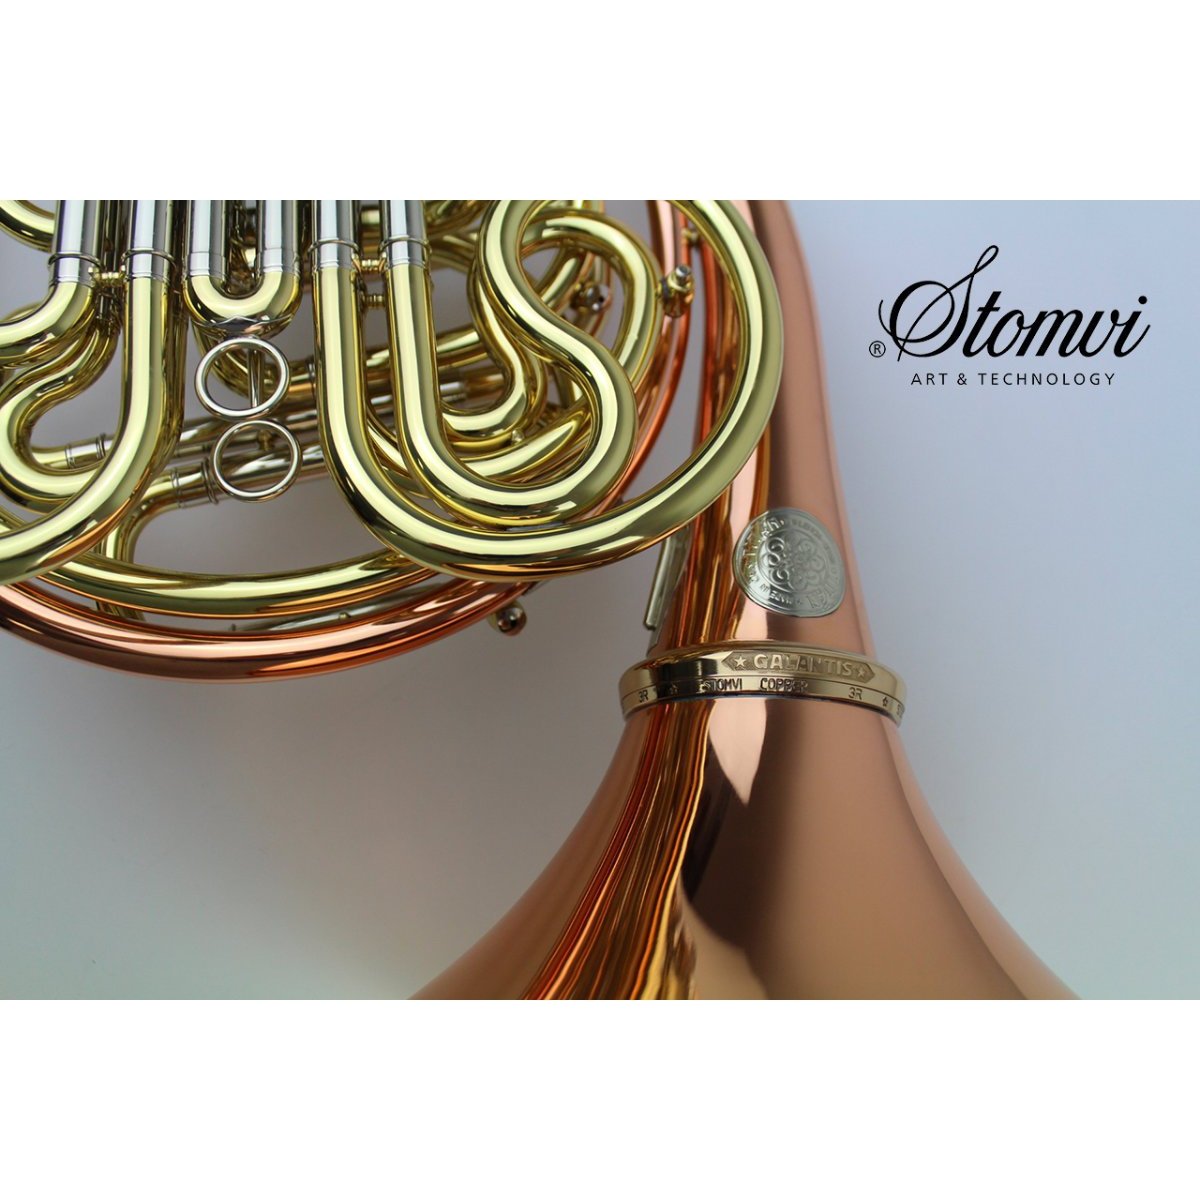 Stomvi - TitÃ¡n SEIS Bb/F Double Copper French Horns (Geyer System)-French Horn-Stomvi-Music Elements